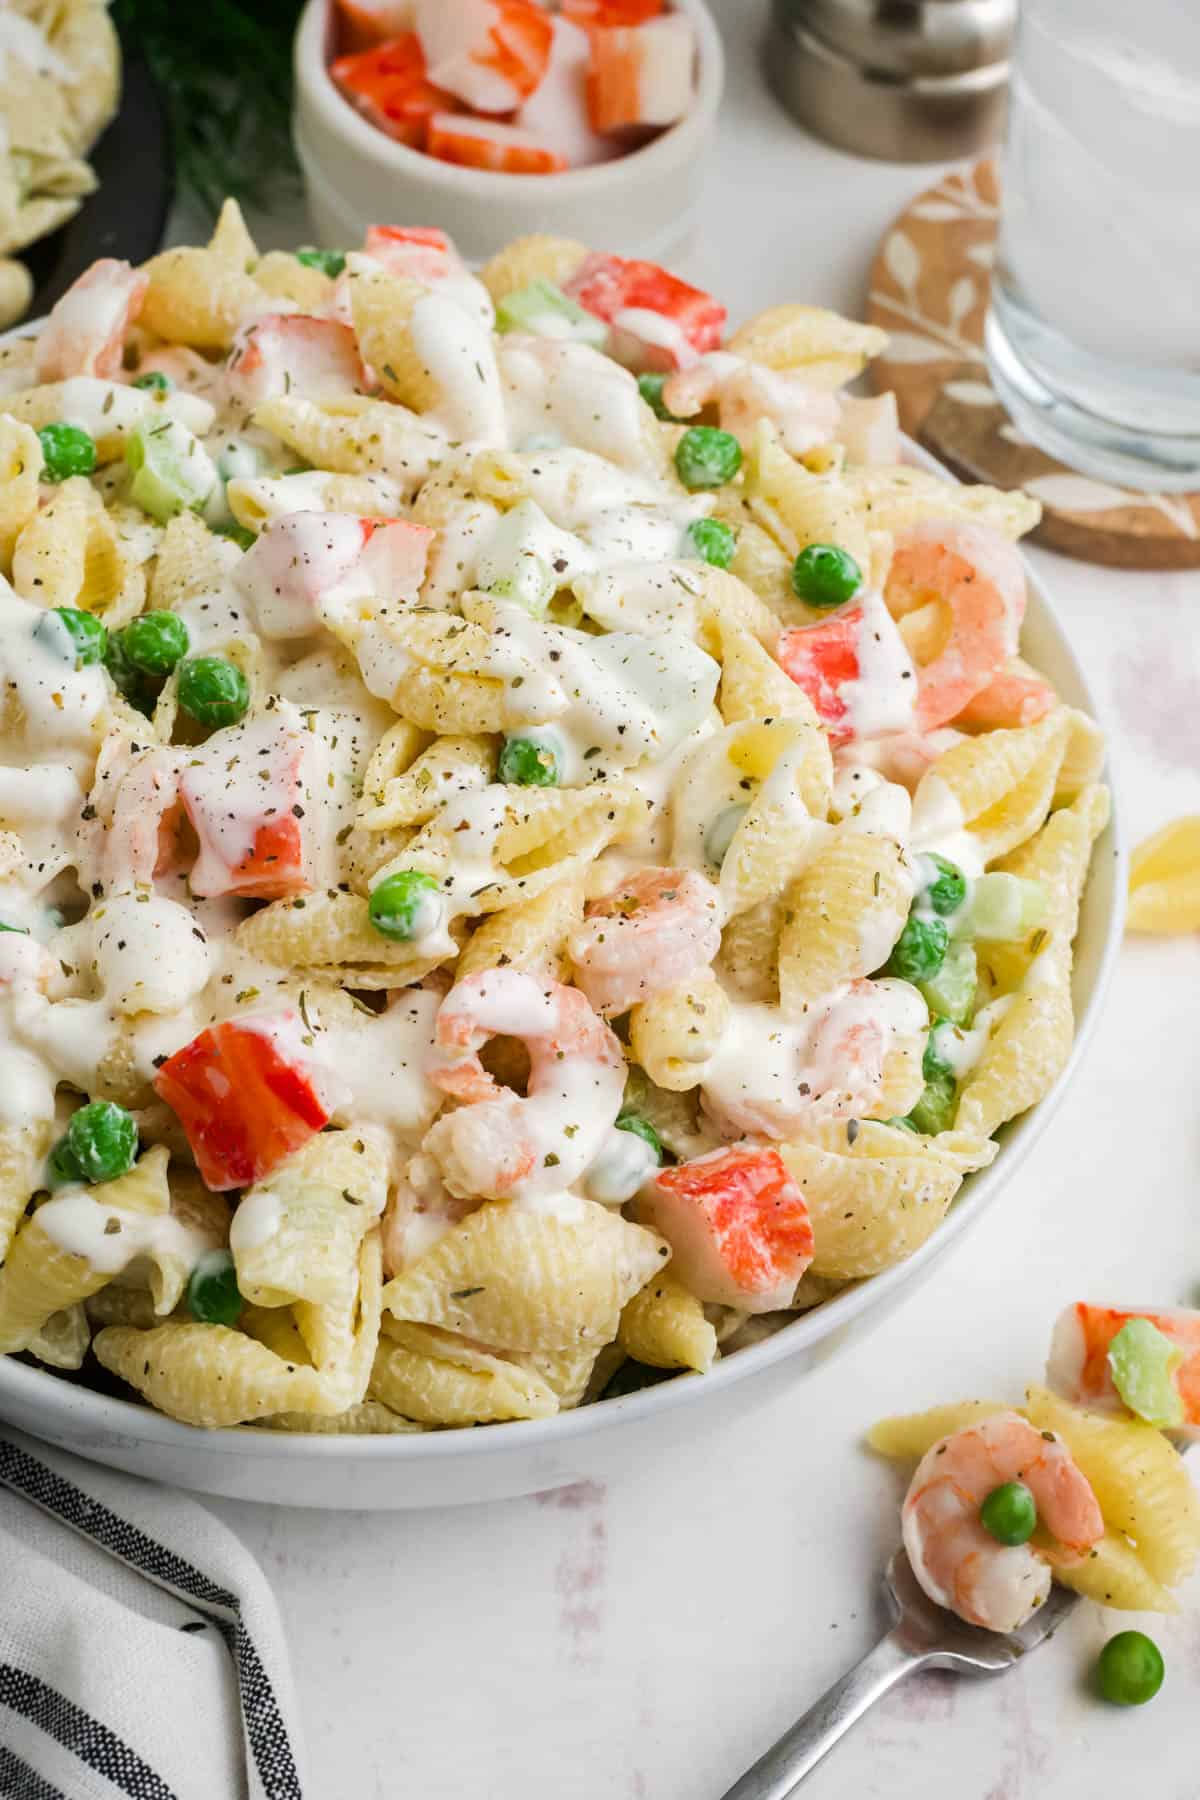 A close up image of seafood pasta salad in a large serving bowl.